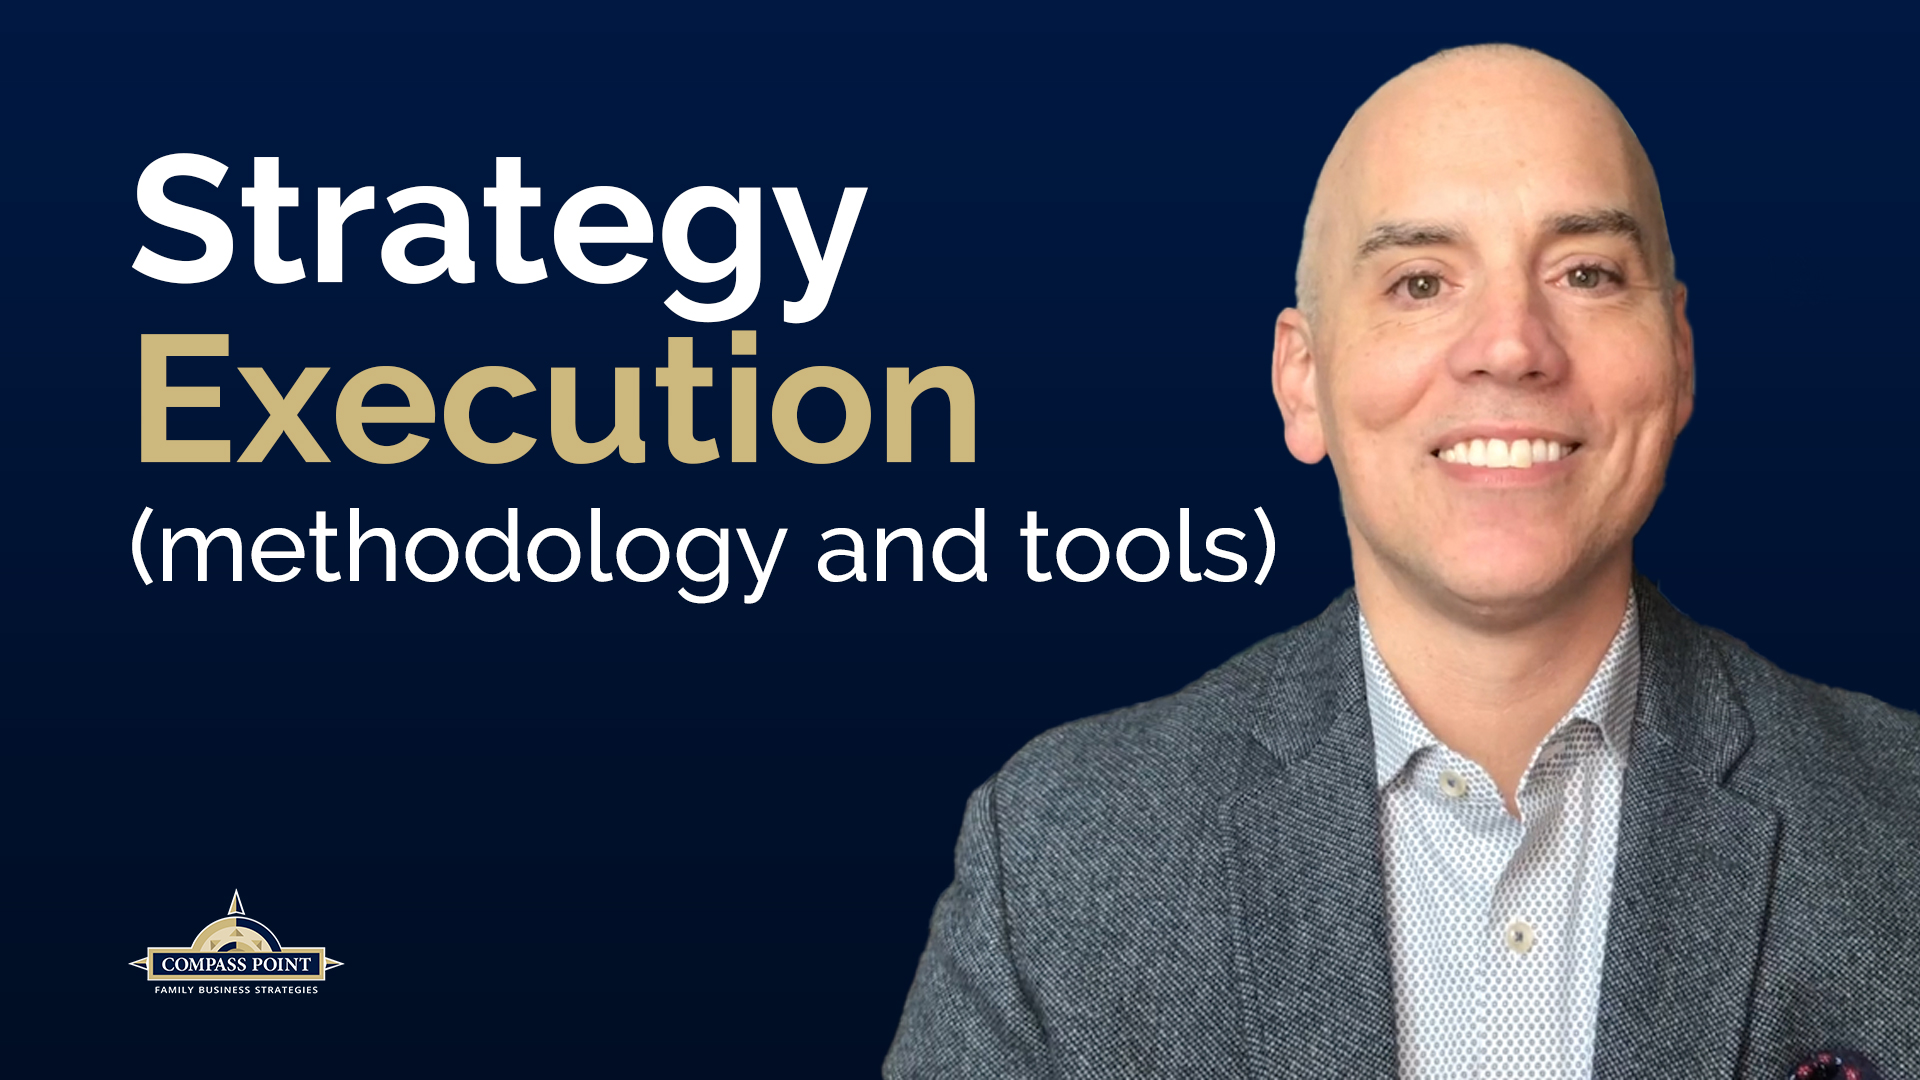 John Bailie - Methodology and Tools for Strategy Execution